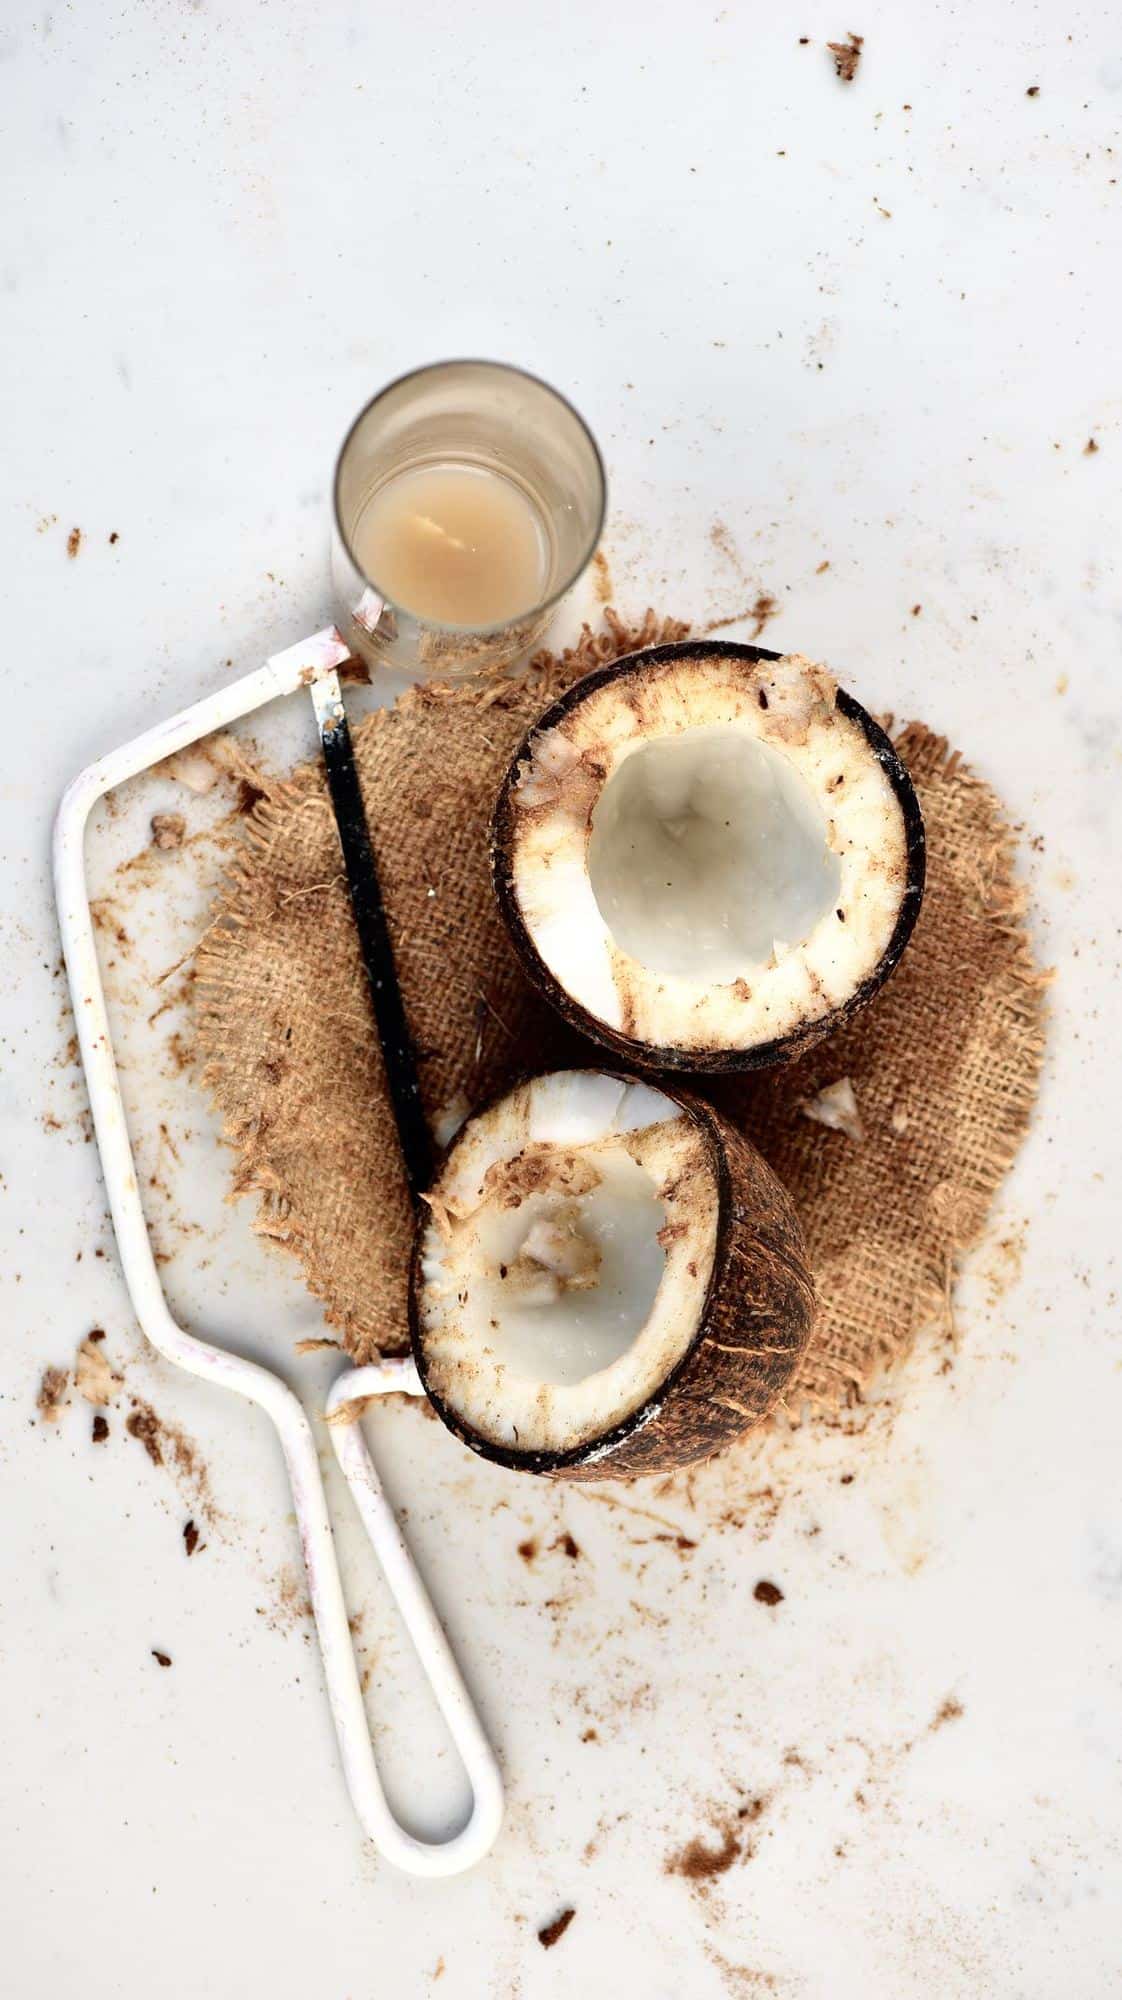 A coconut cut in two with a saw next to it